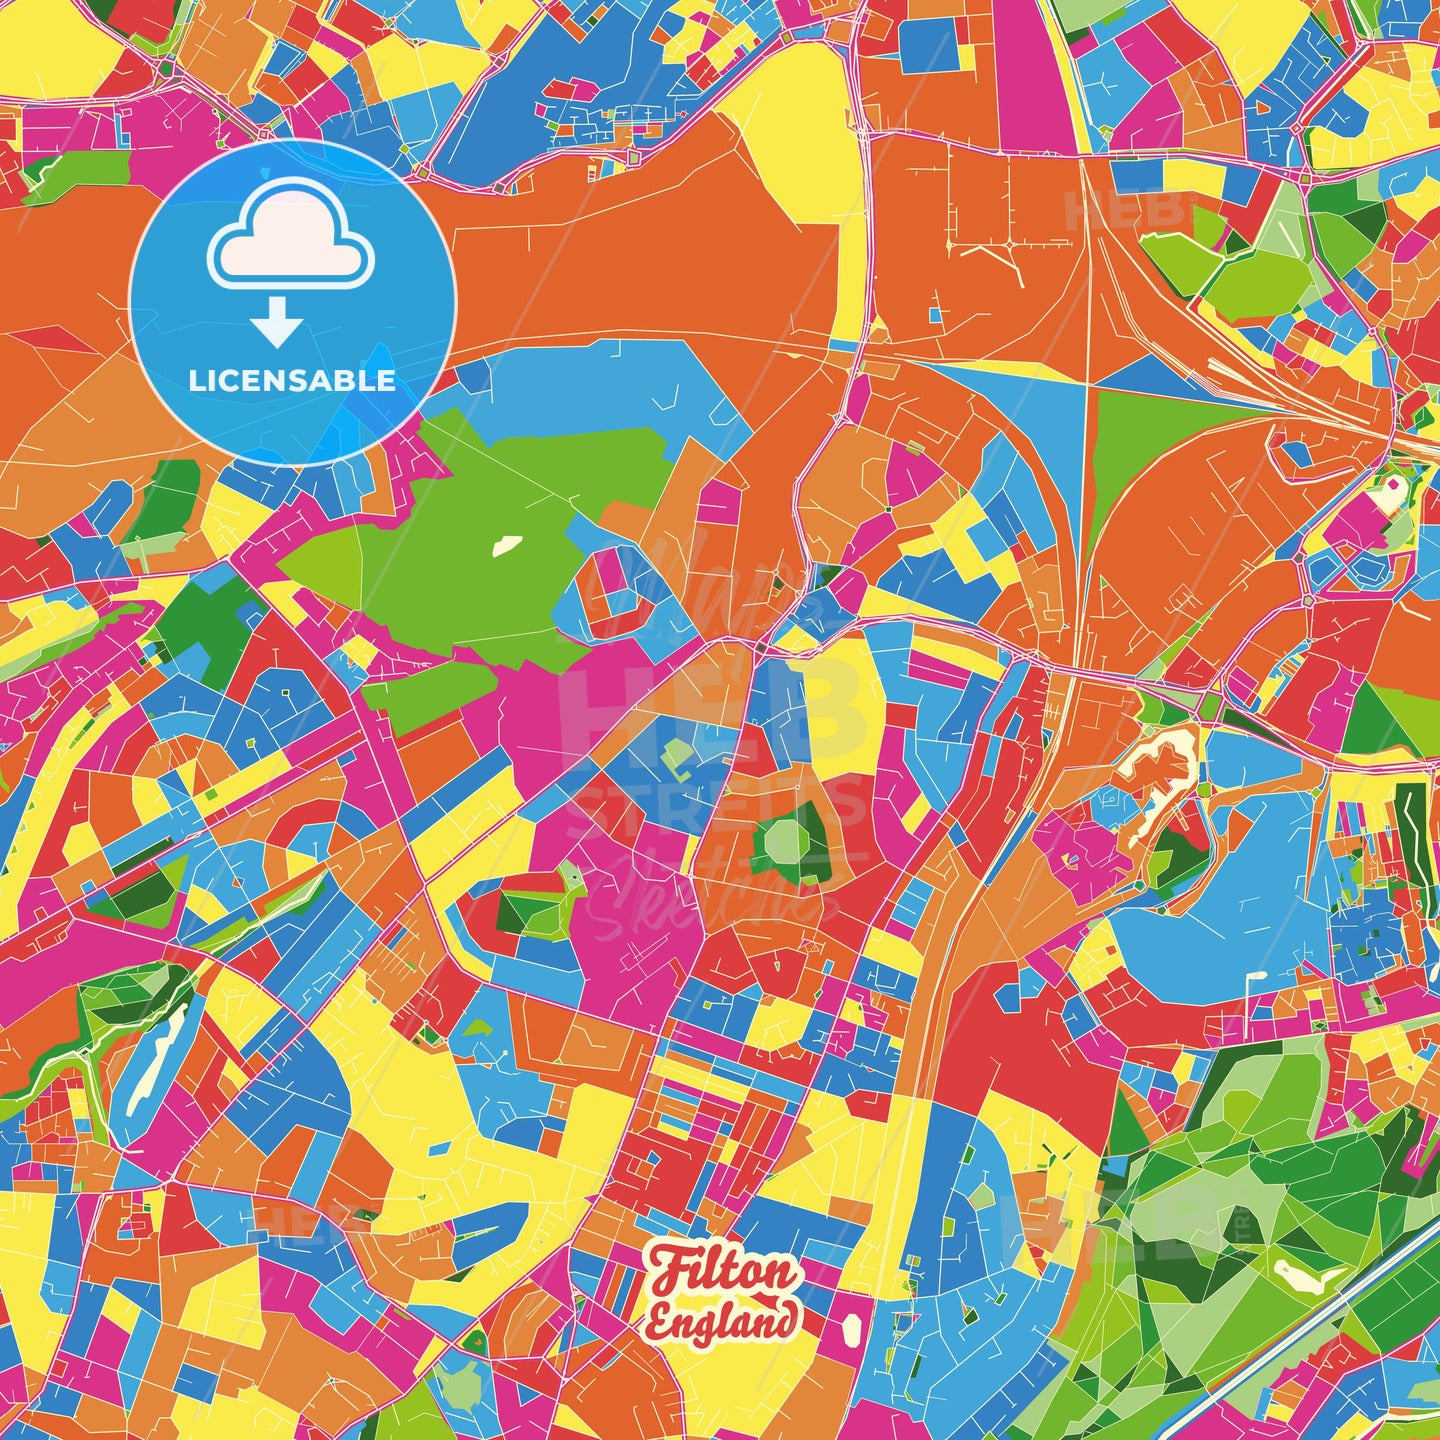 Filton, England Crazy Colorful Street Map Poster Template - HEBSTREITS Sketches